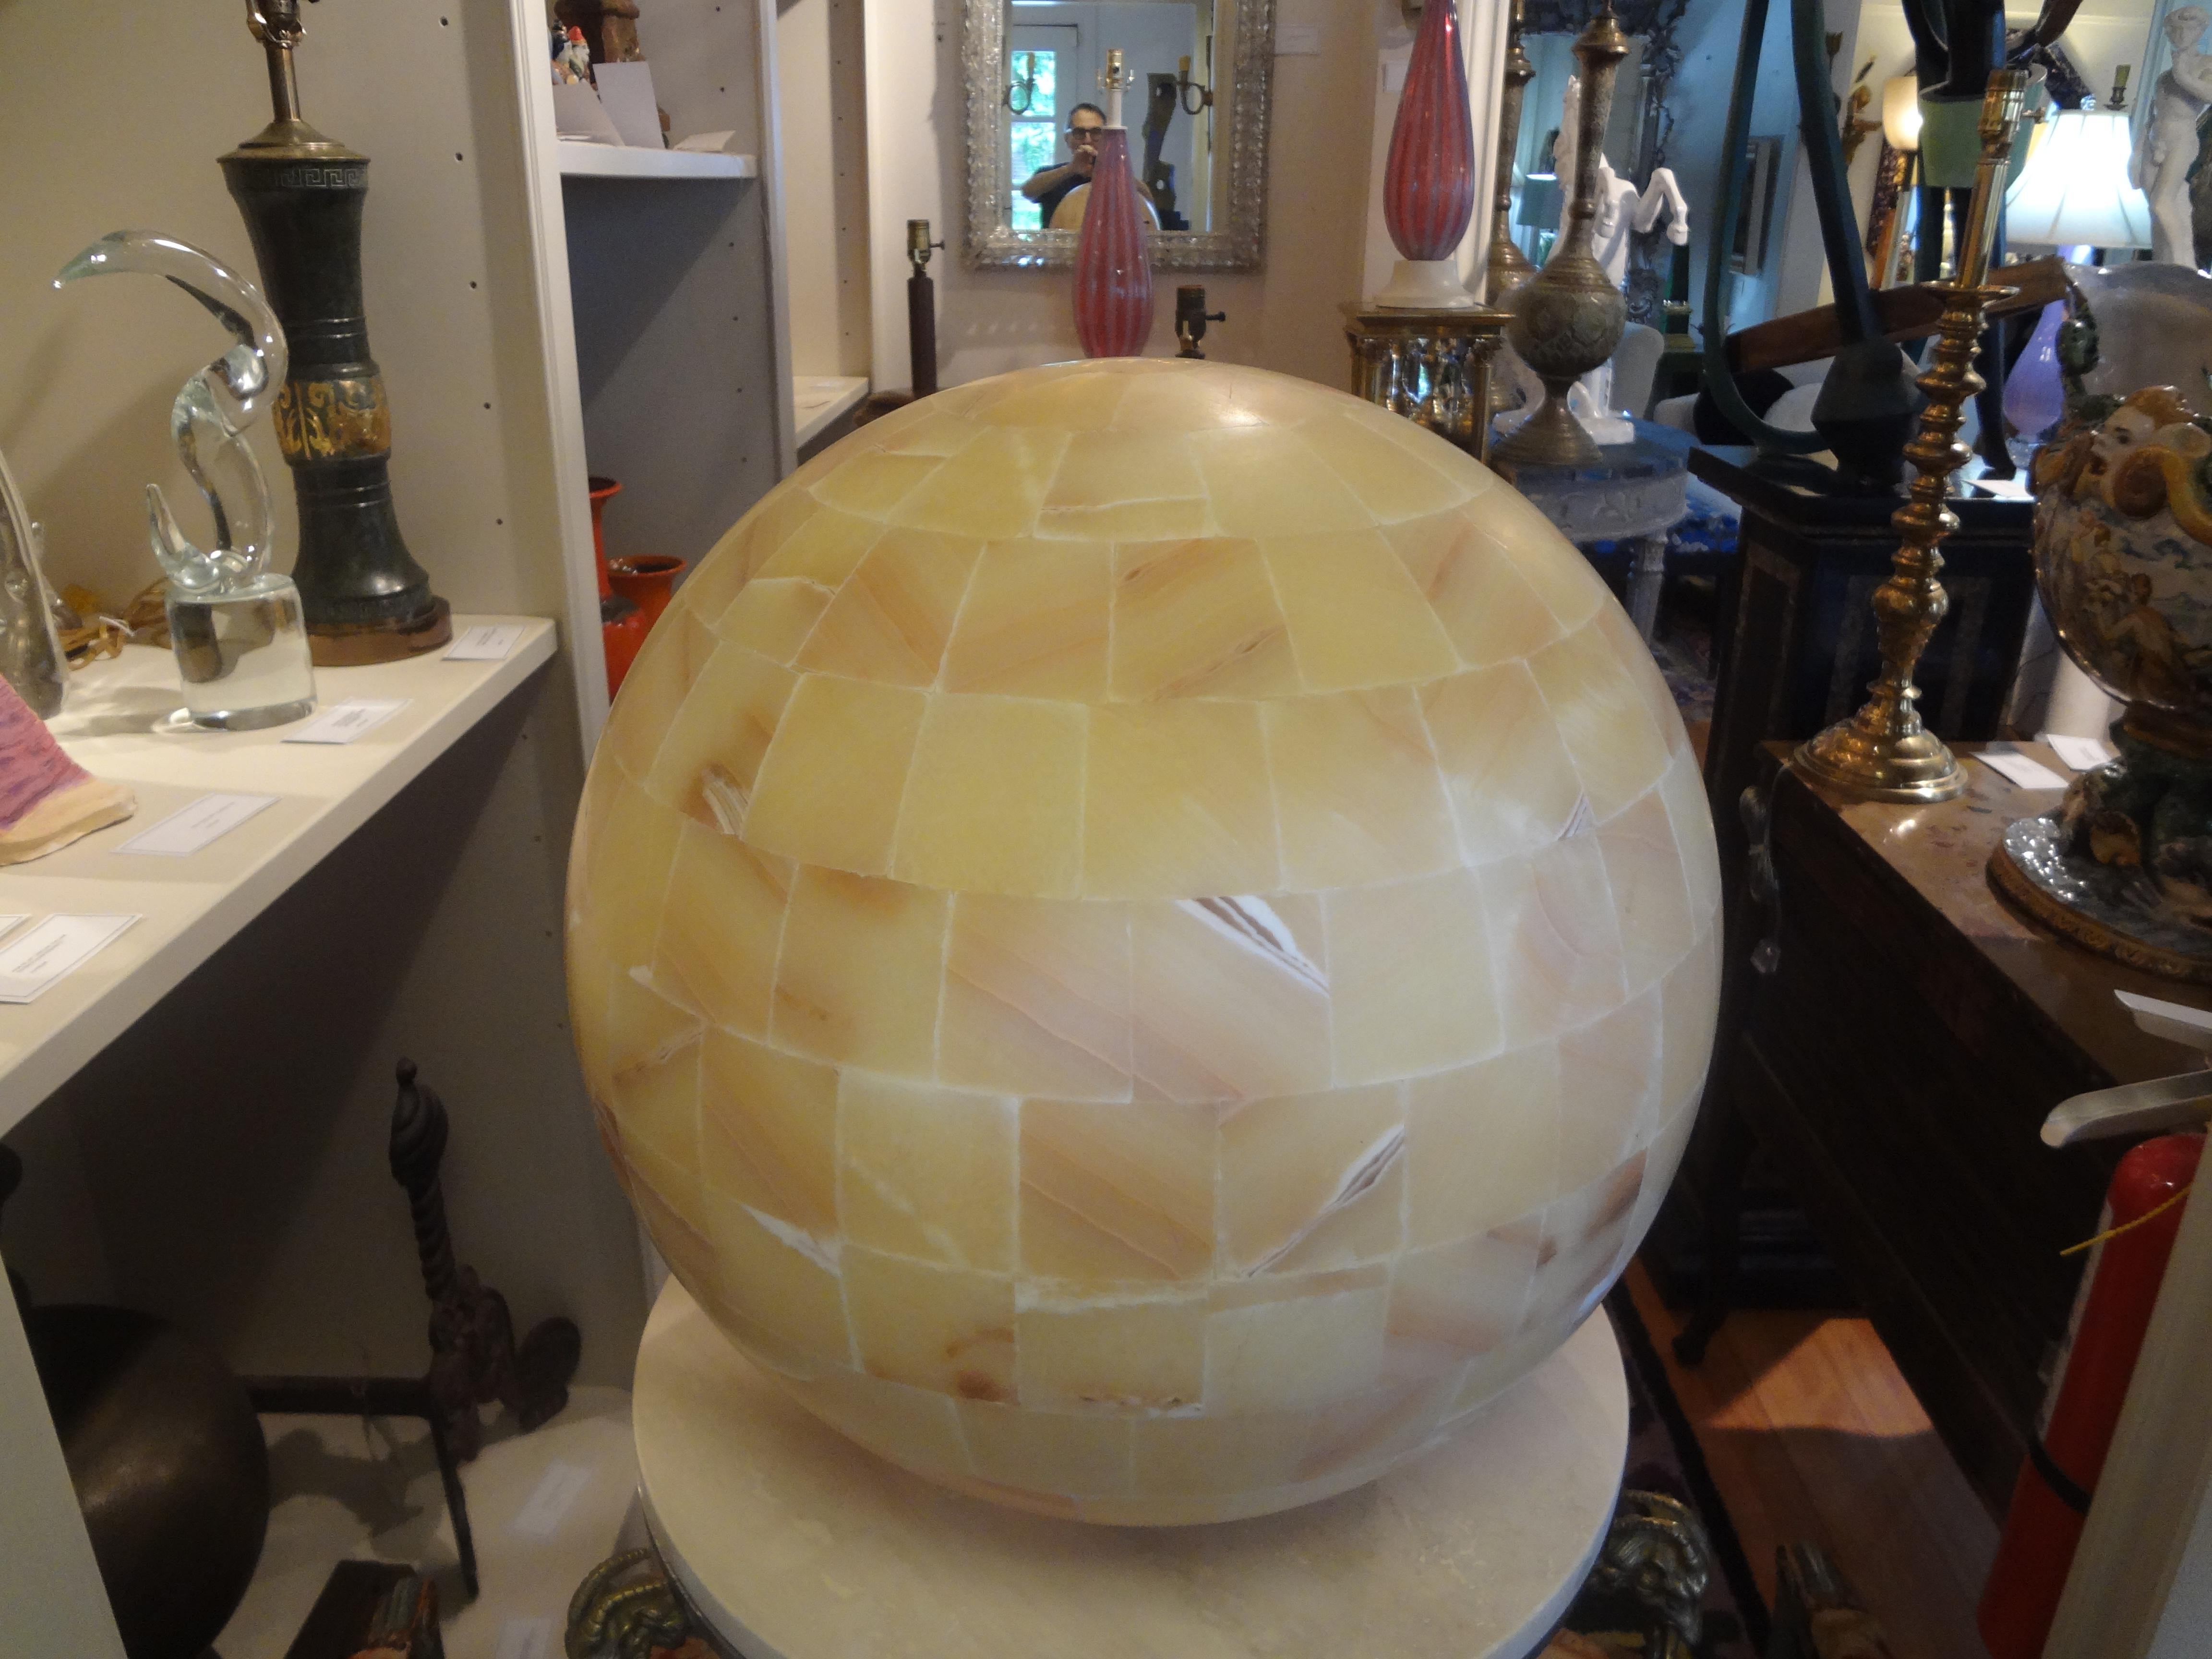 Large vintage onyx sphere lamp. This stunning 20th century onyx table lamp is comprised of cut and polished onyx in a circular sphere that emits a beautiful effect when lit.